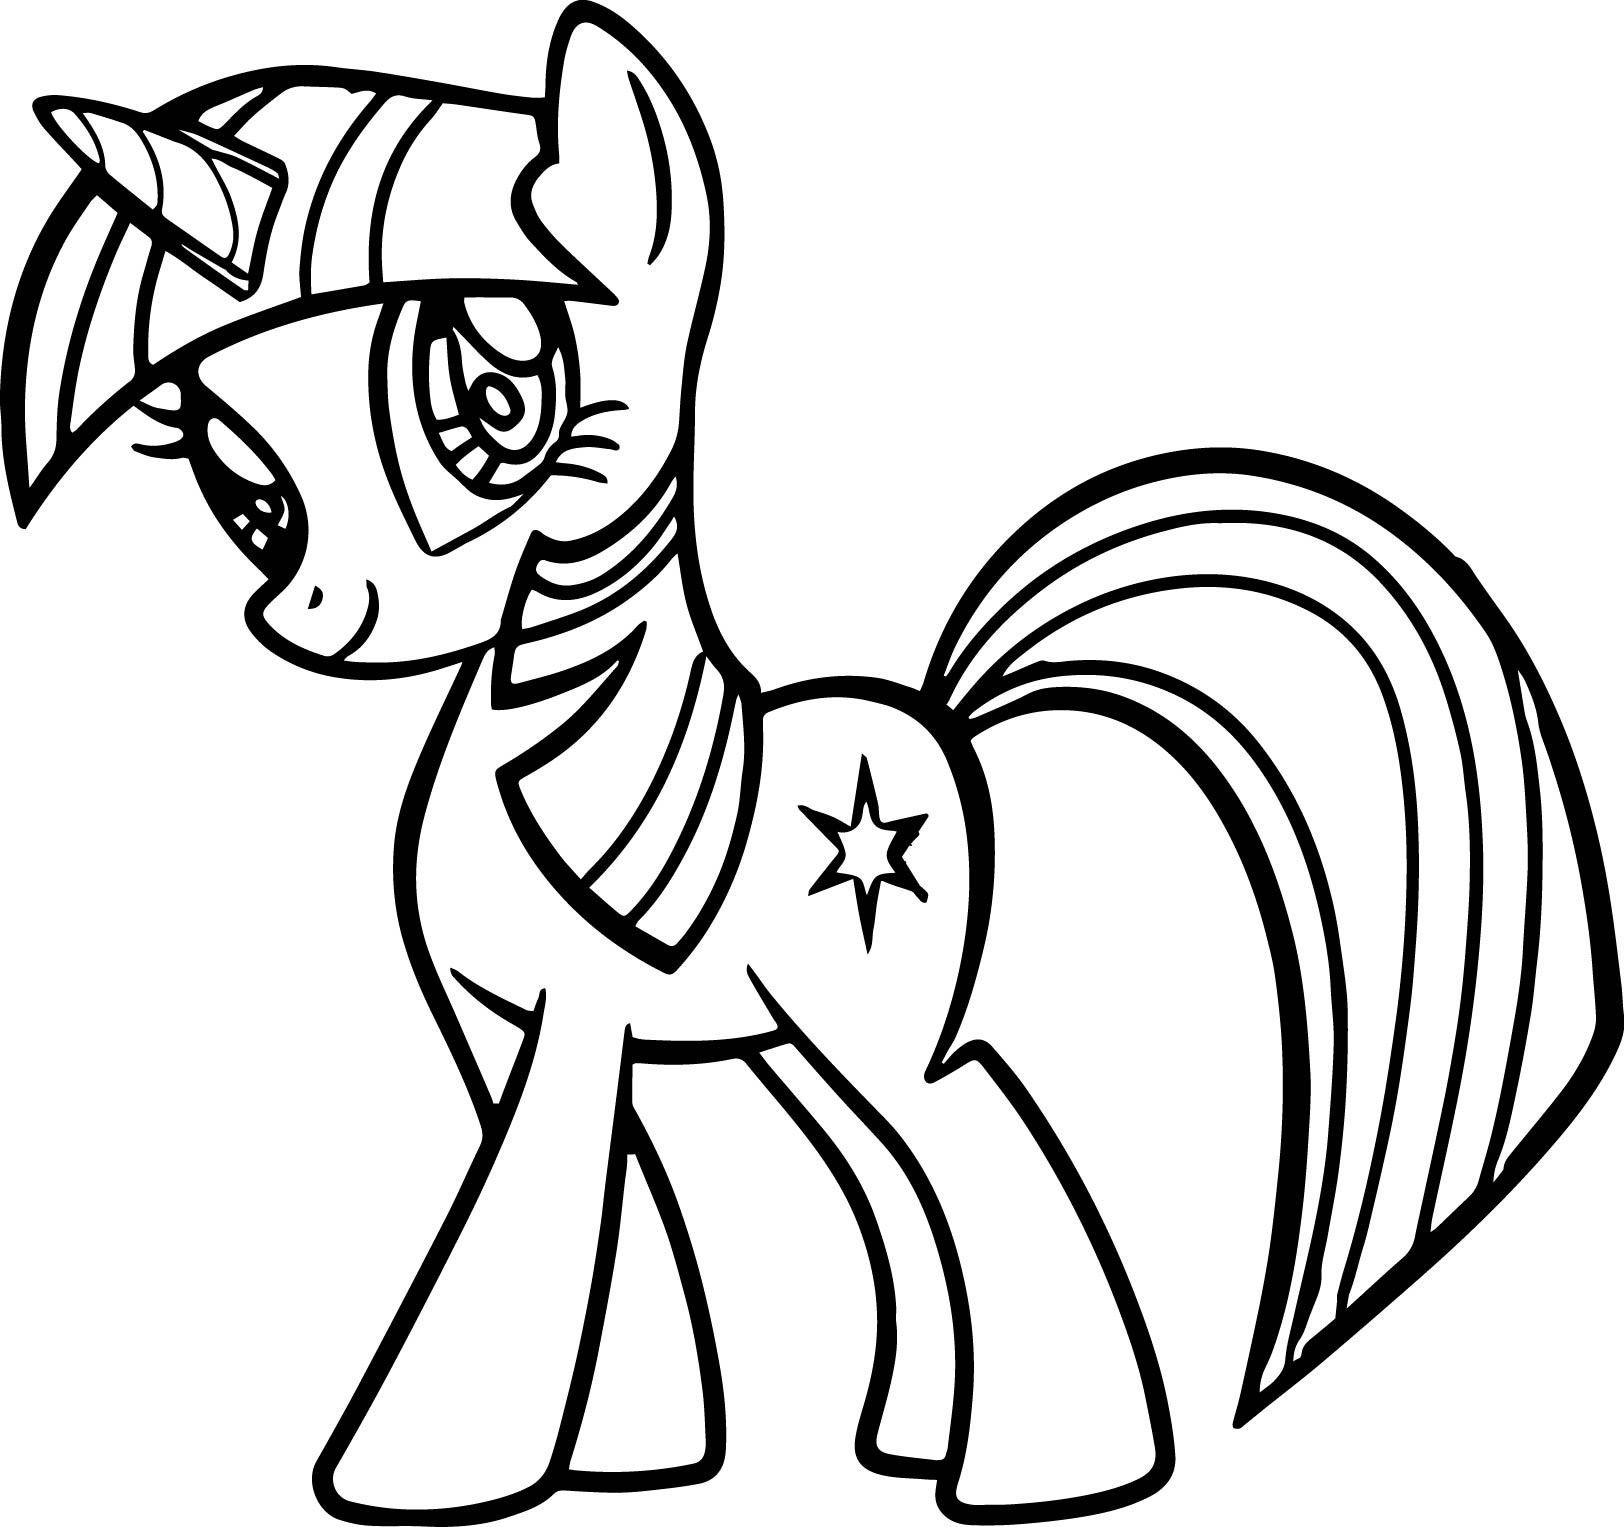 Beautiful My Little Pony Coloring Pages Spitfire - helpkash.org